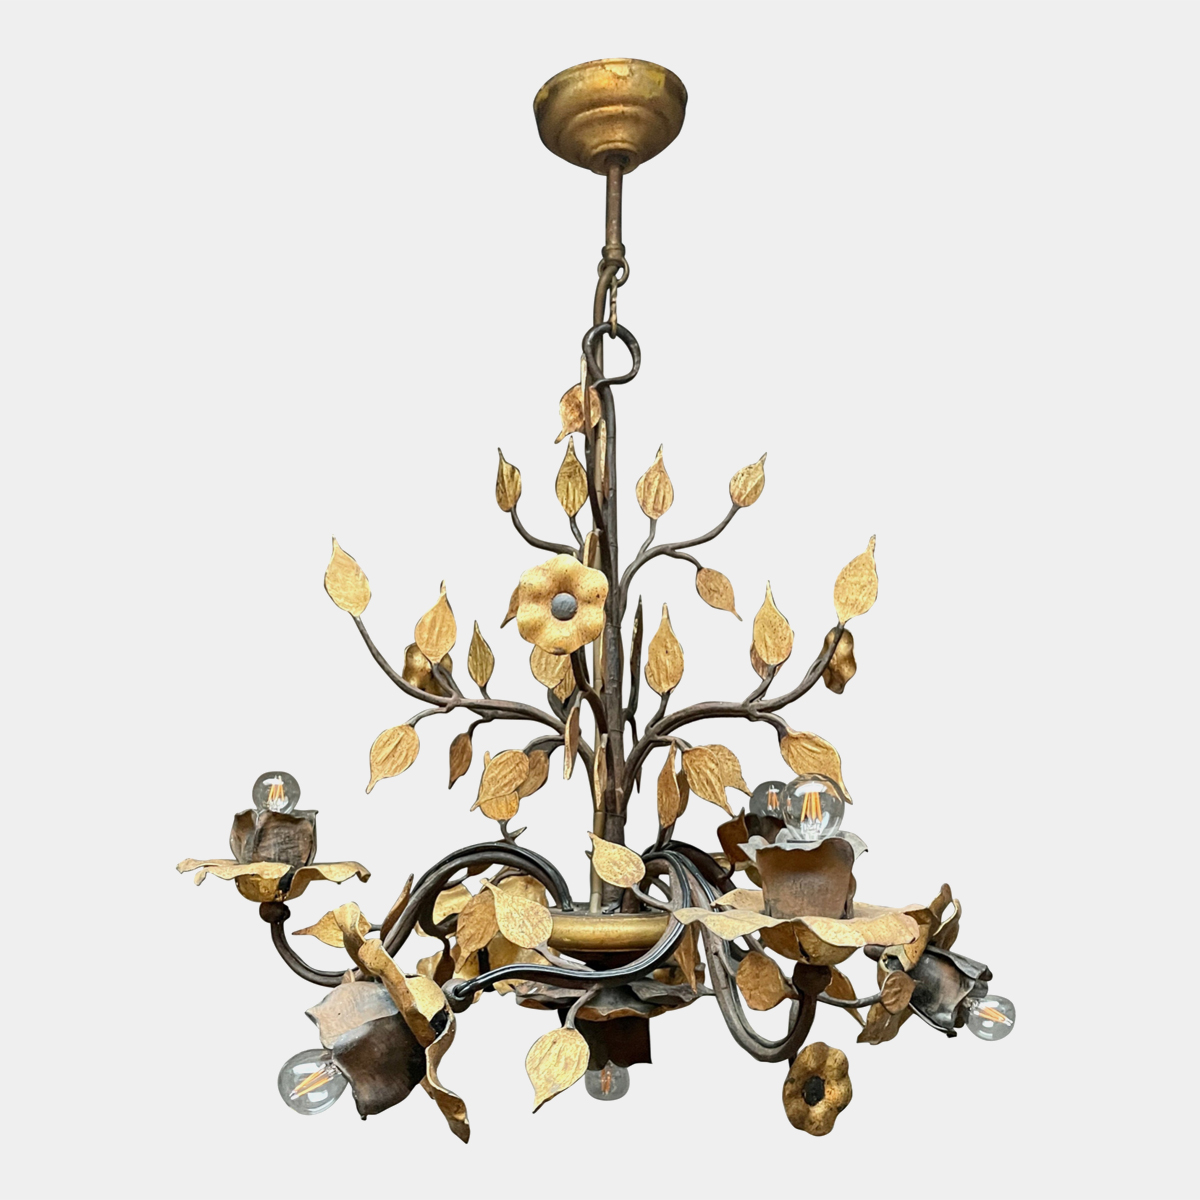 A Wrought Iron and Gold Gilt Chandelier